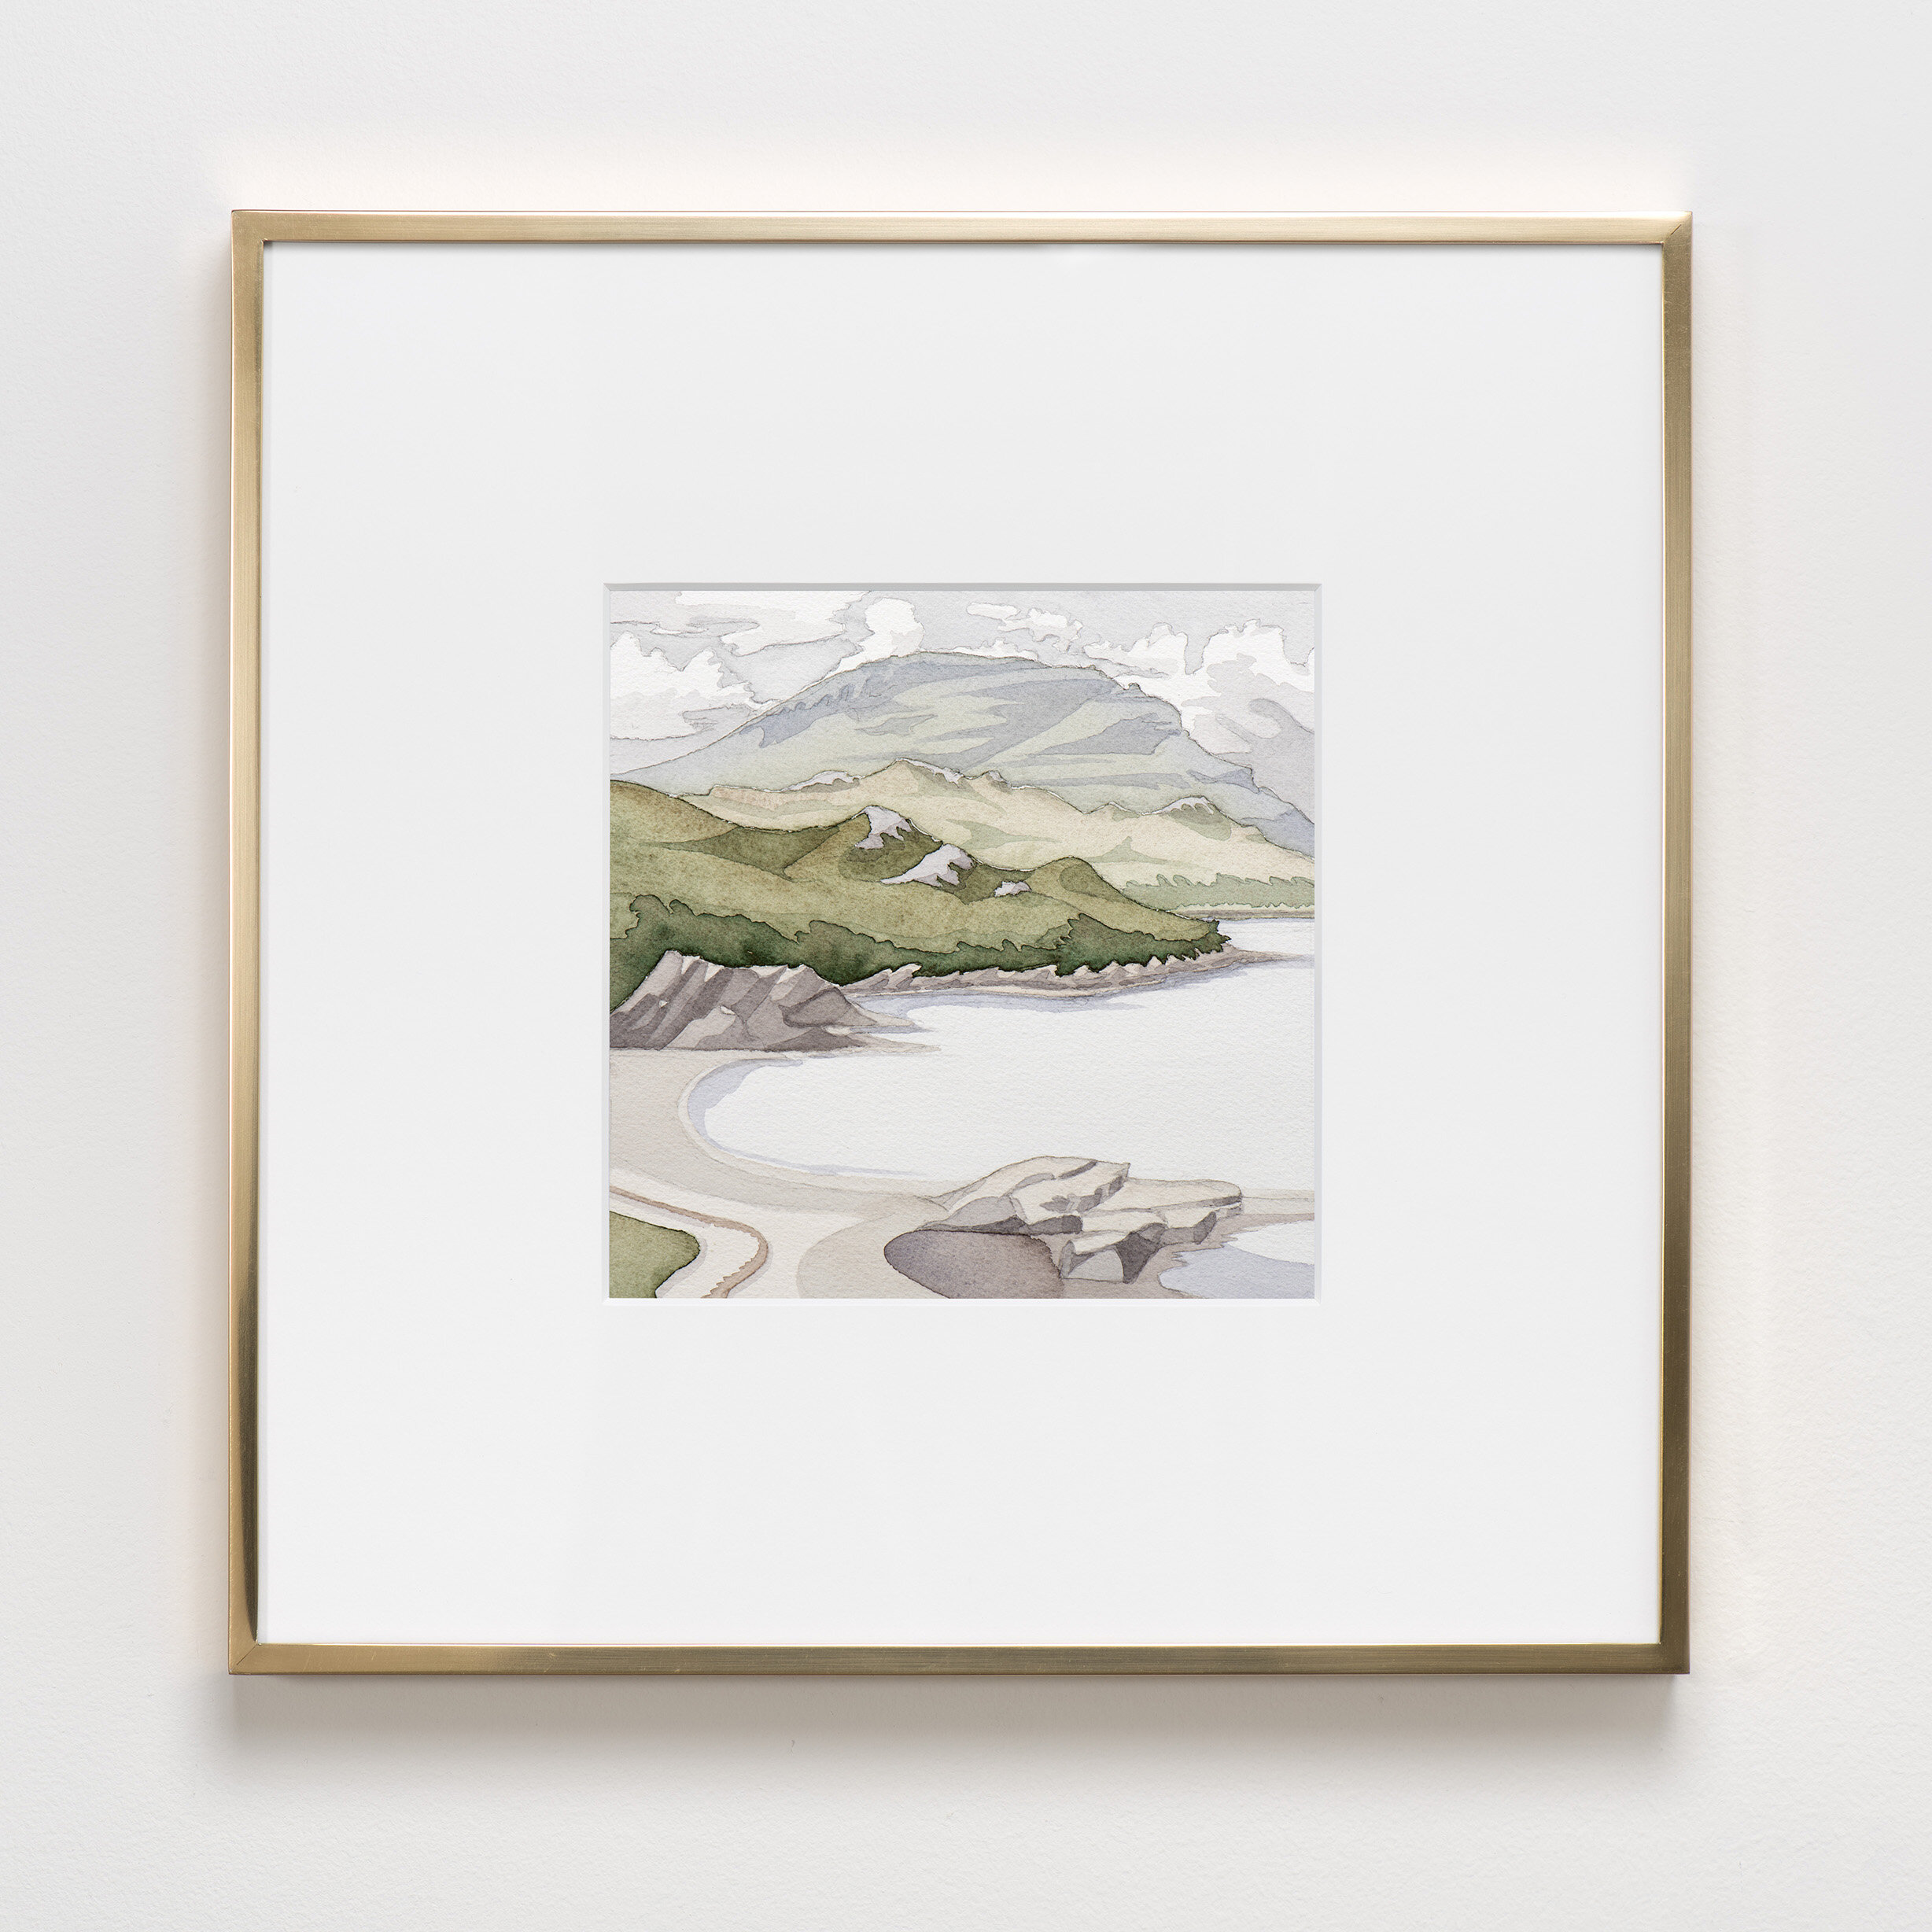   Shieldaig , 2019 Watercolor on paper 16 1/4 x 16 1/4 inches (framed) 